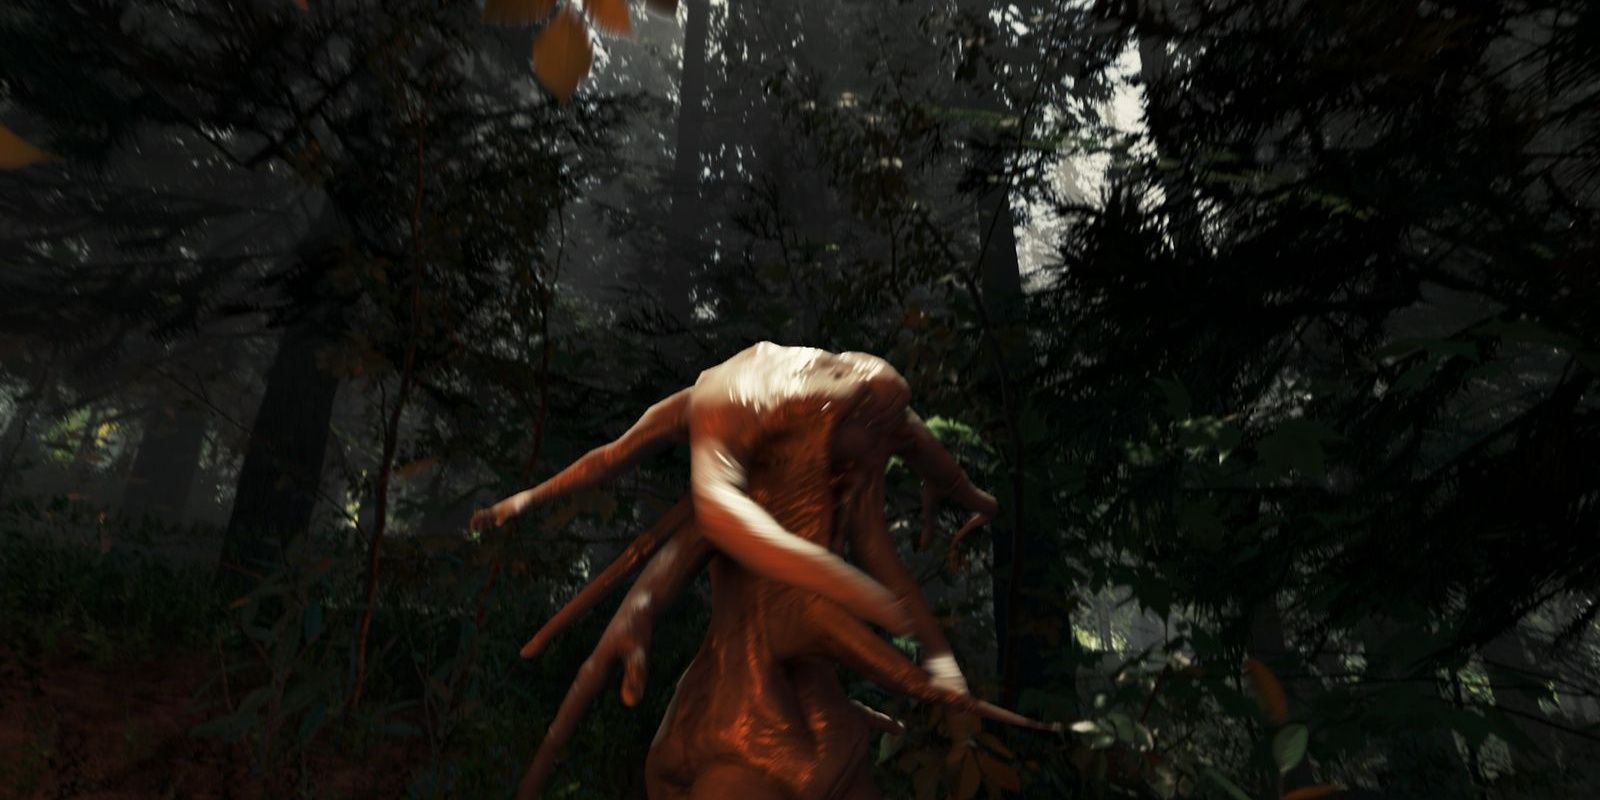 Mutant encounter in The Forest